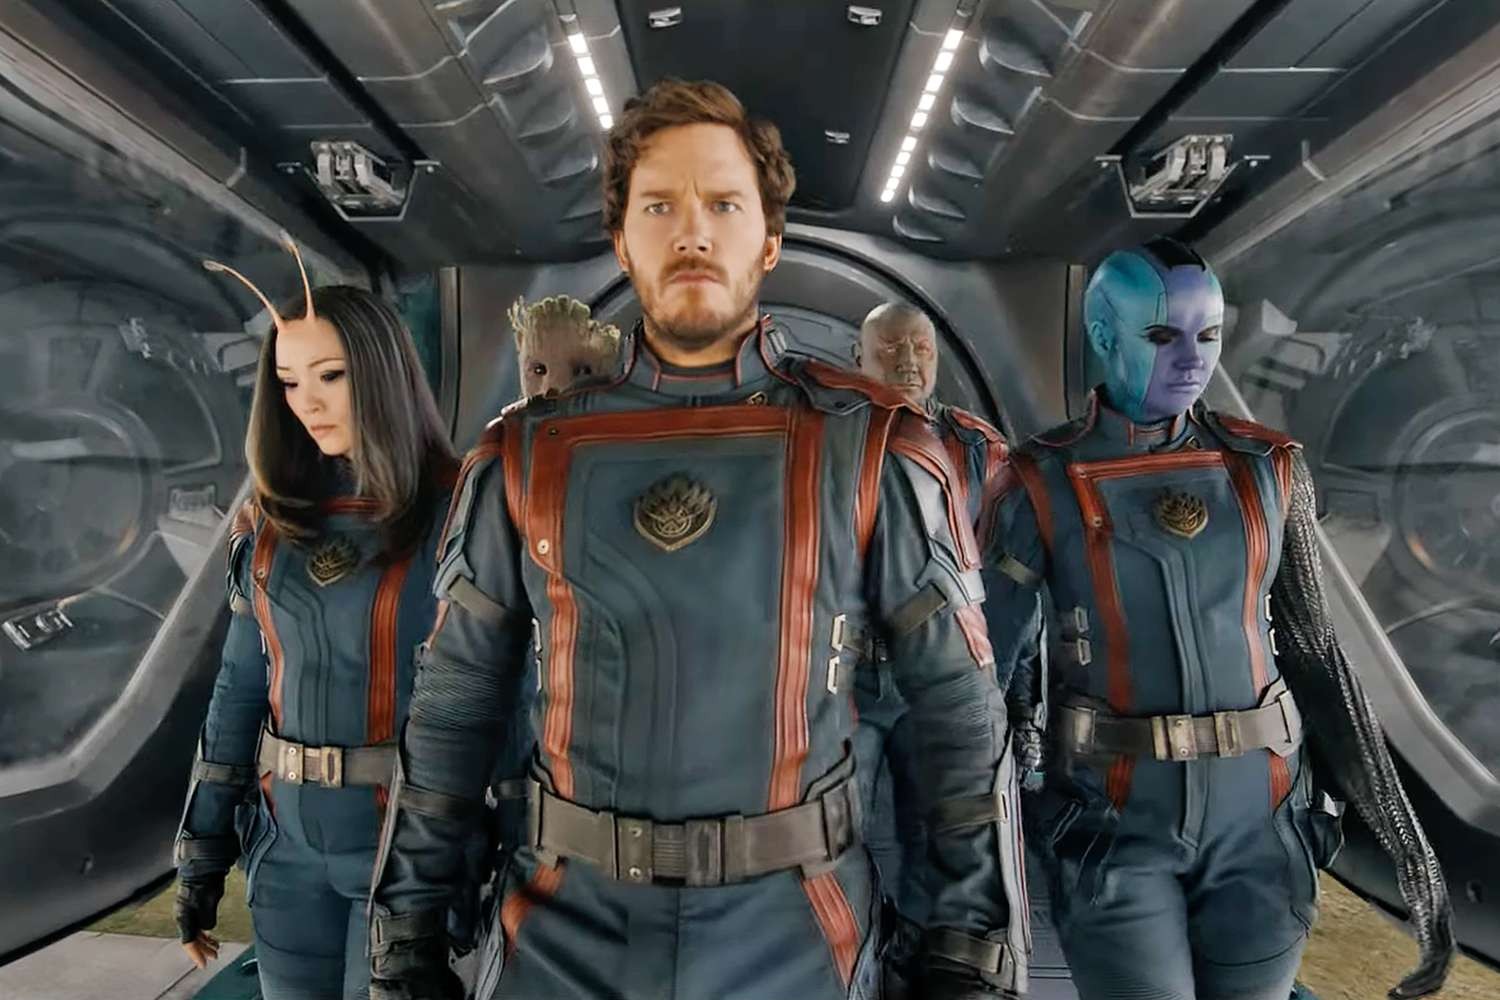 James Gunn ended the Guardians of the Galaxy trilogy on a bittersweet note